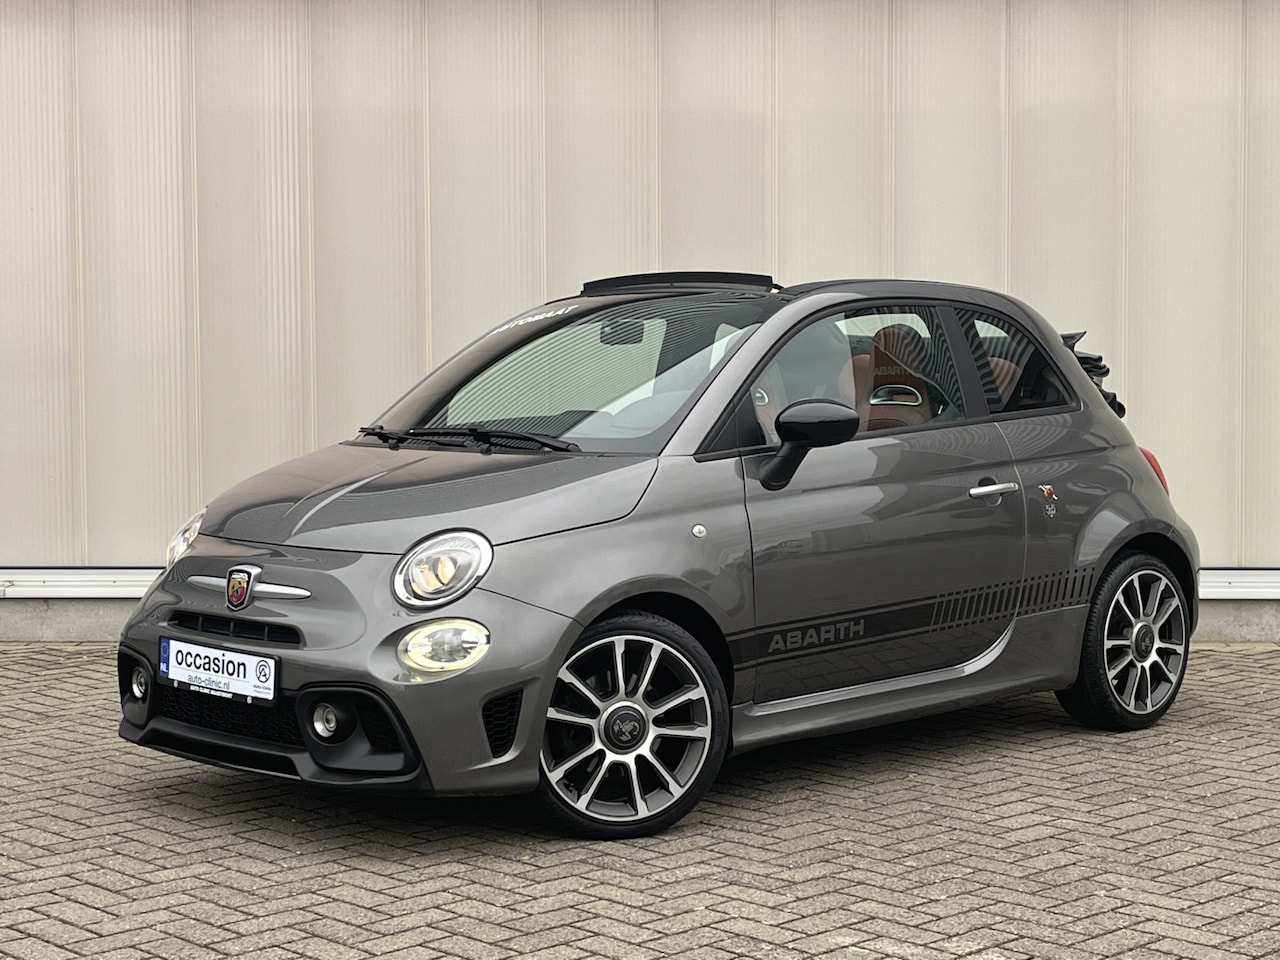 commando logboek Vermelden abarth fiat 500 grey automaat used – Search for your used car on the parking